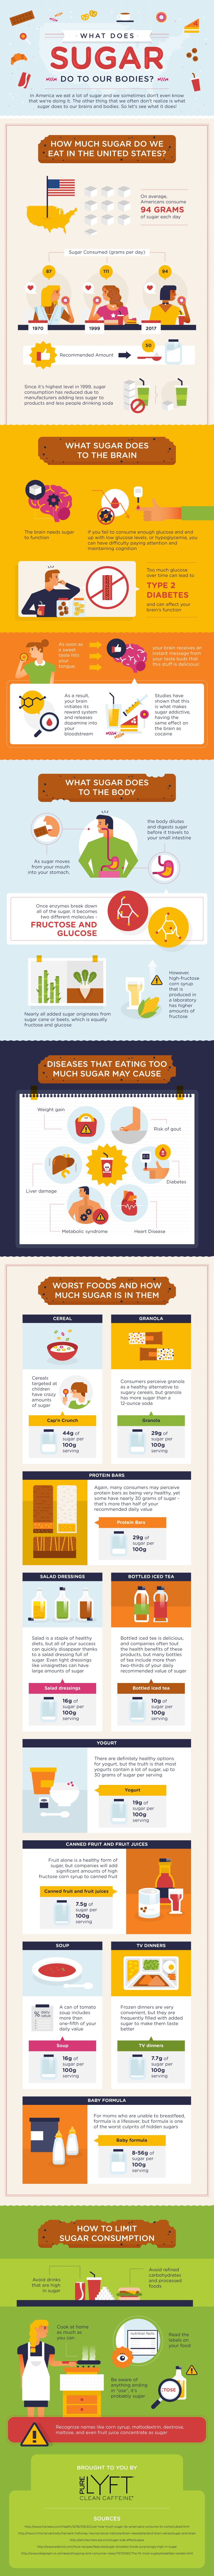 Infographic for What Does Sugar Do to Our Bodies?